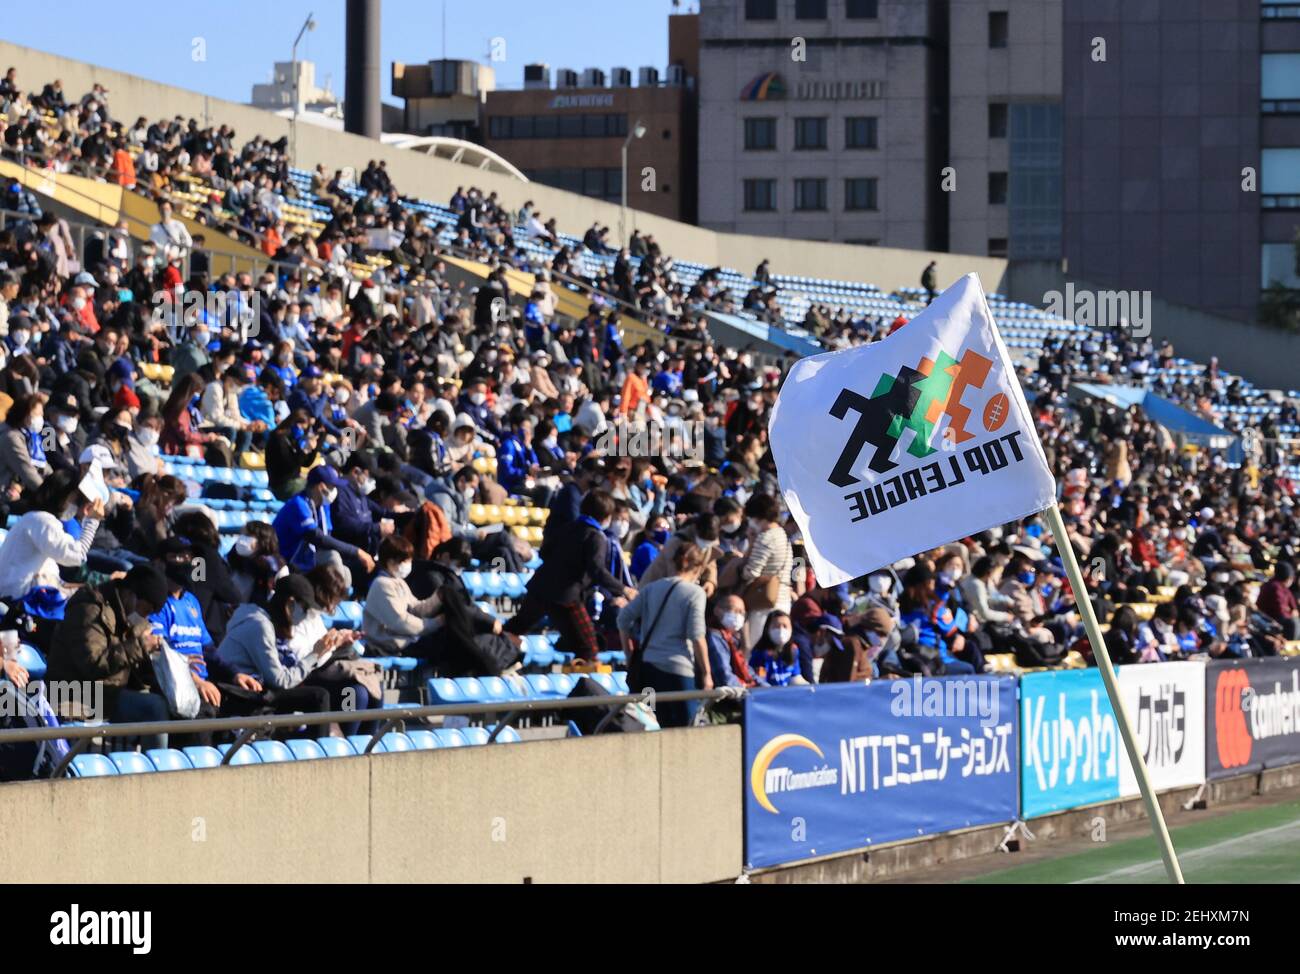 Tokyo, Japan. 20th Feb, 2021. People enjoy an opening game of Japan Rugby Top League 2021 tournament at the Prince Chichibu rugby stadium in Tokyo on Saturday, February 20, 2021. Panasonic Wild Knights defeated Ricoh Black Rams 55-14. Credit: Yoshio Tsunoda/AFLO/Alamy Live News Stock Photo